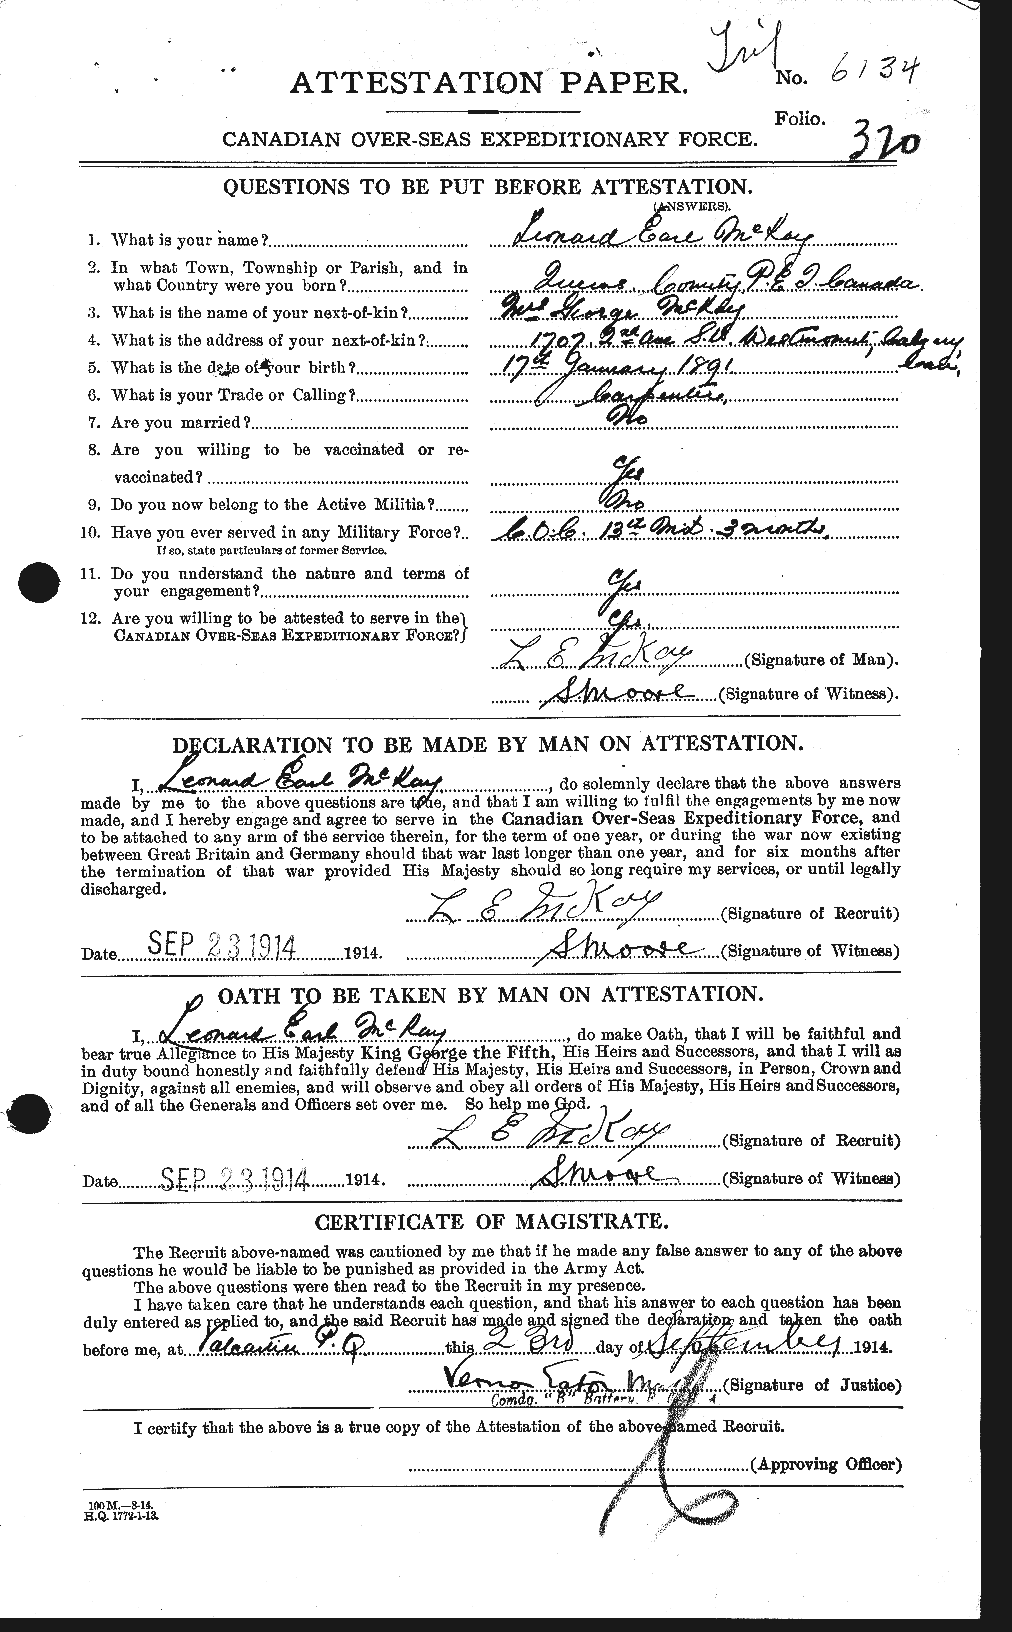 Personnel Records of the First World War - CEF 527148a